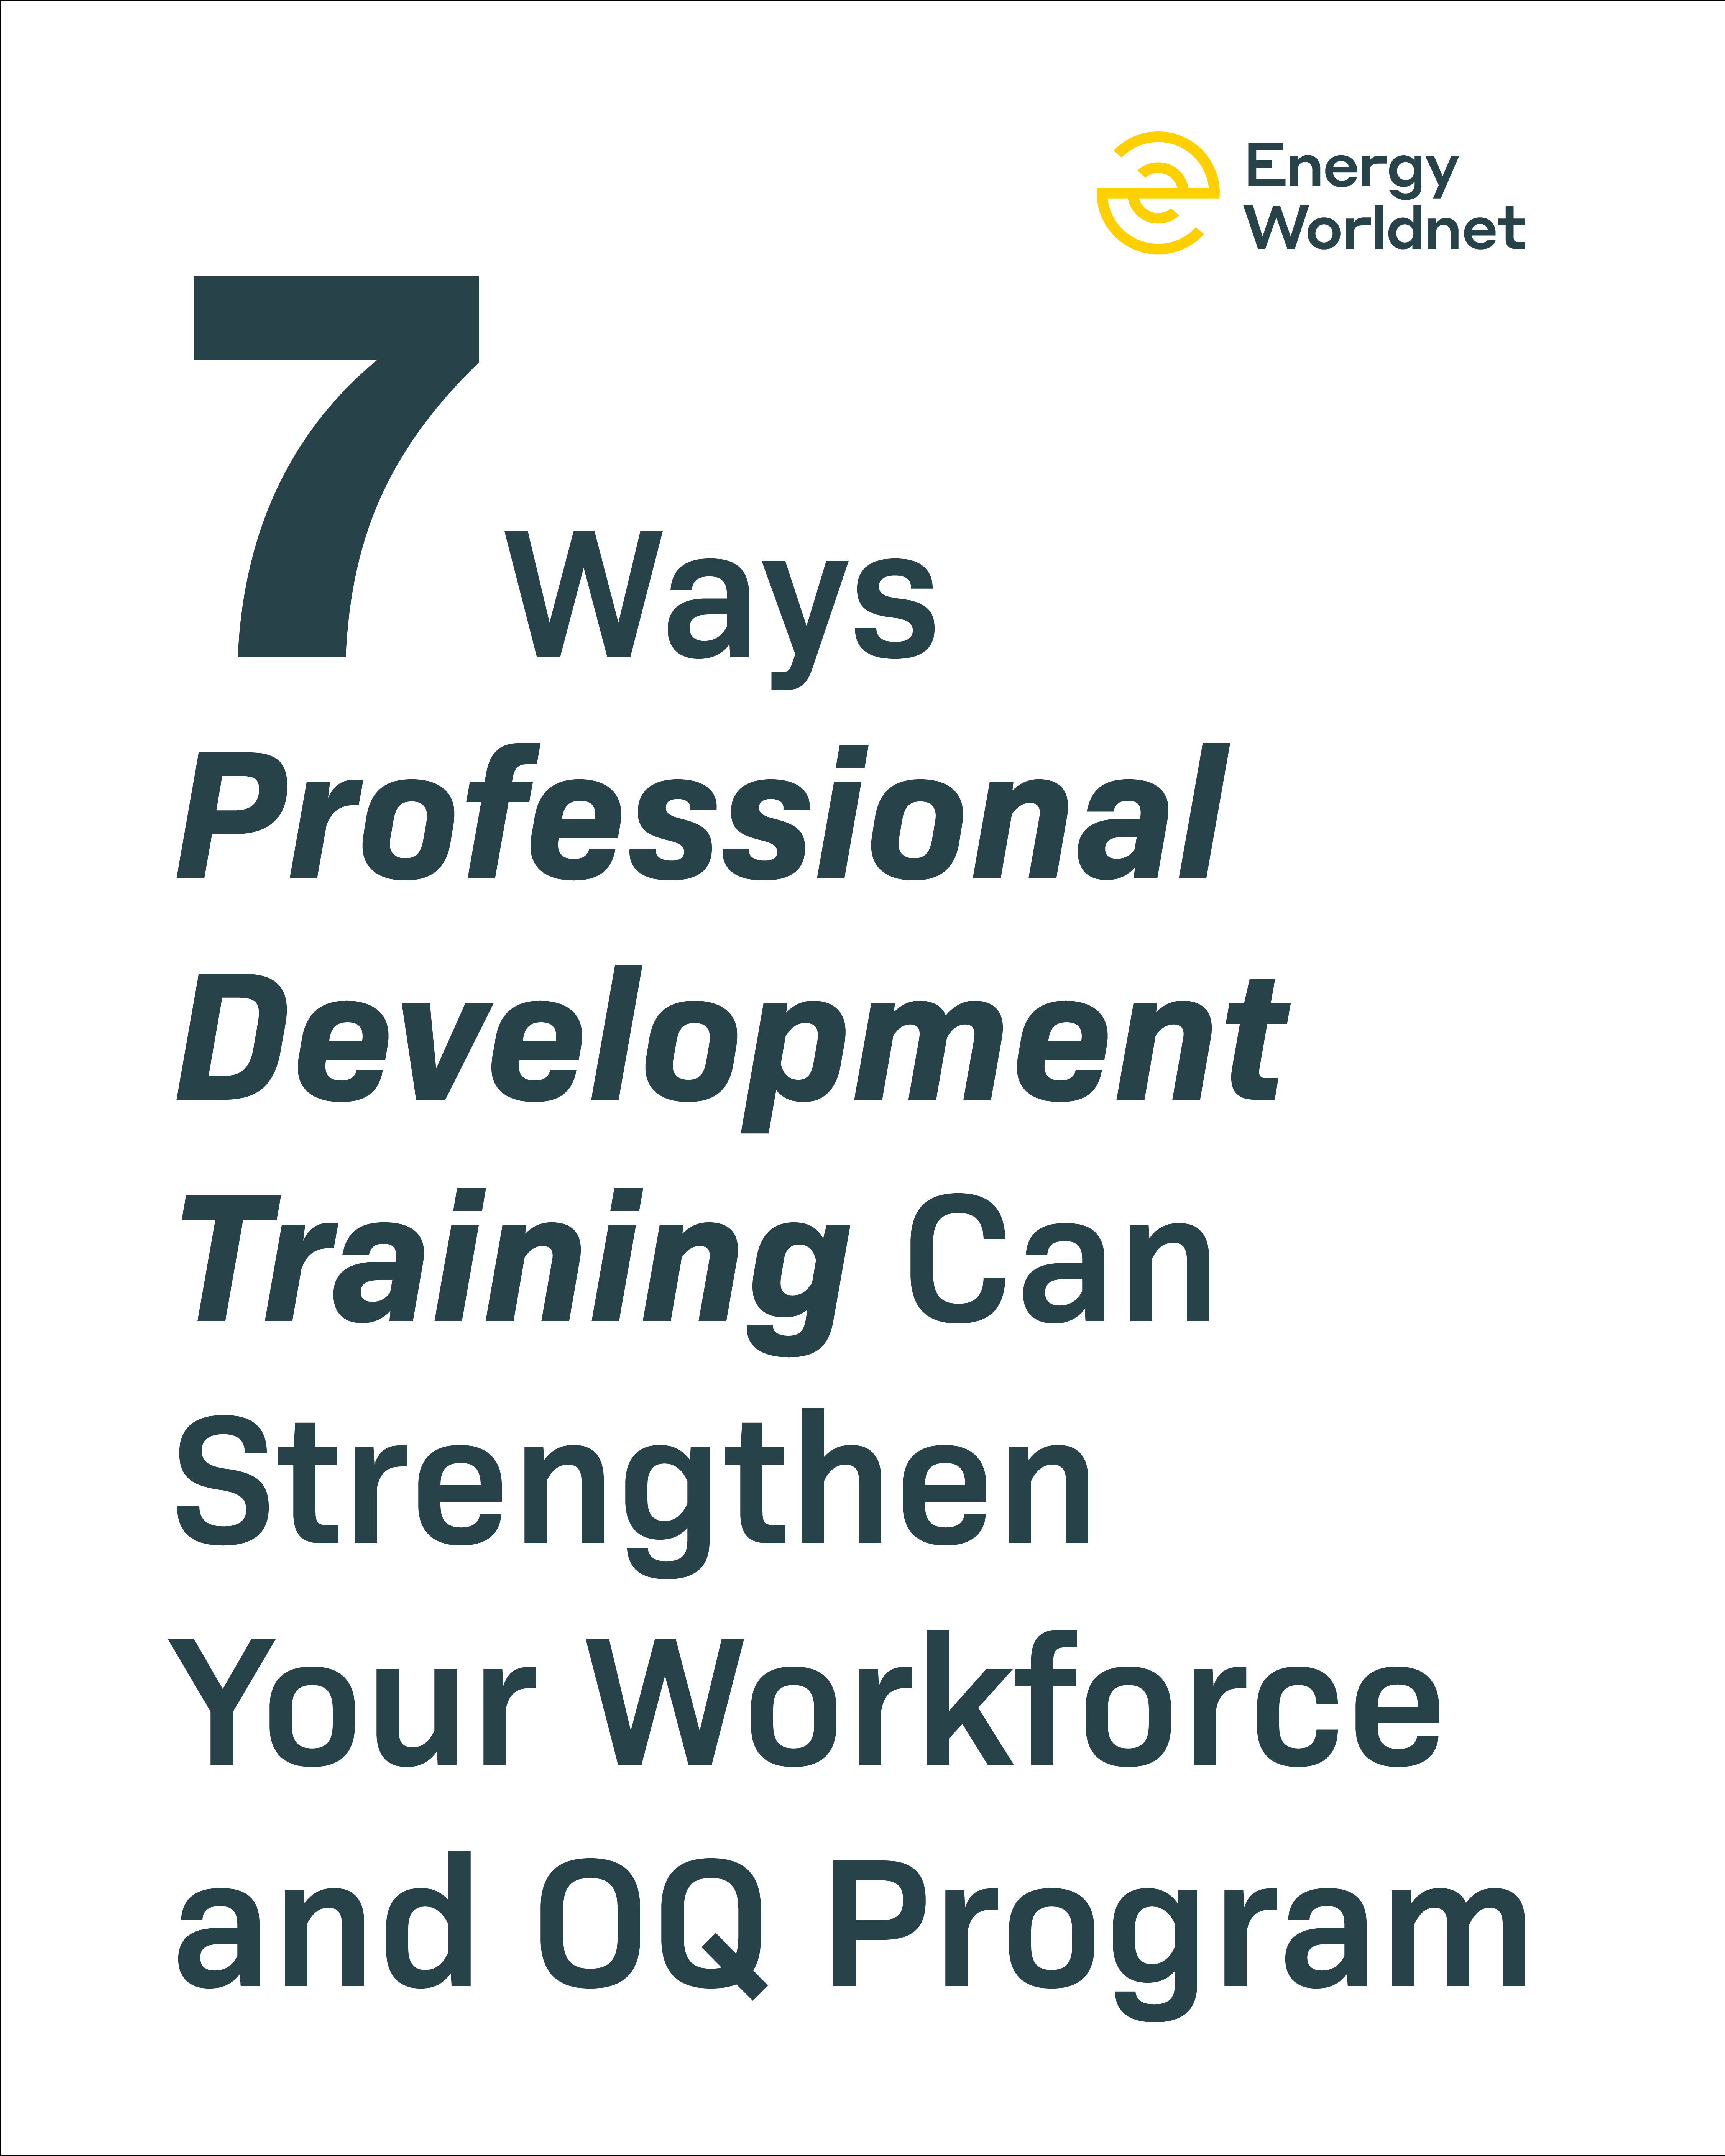 7 ways professional development training can strengthen your workforce and oq program